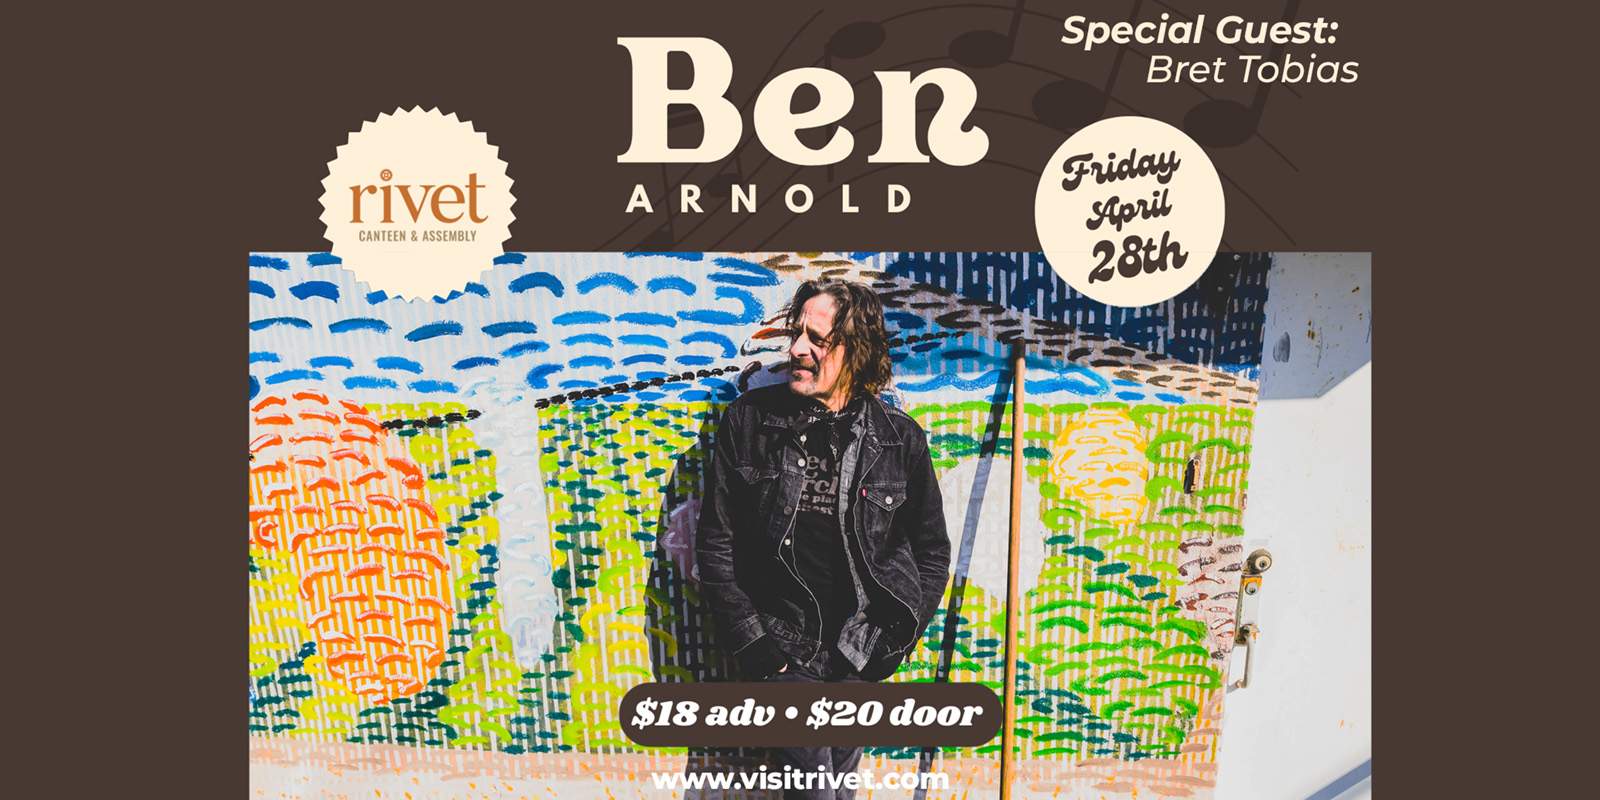 Ben Arnold and special guest Bret Tobias live at Rivet: Canteen & Assembly in Pottstown, PA, on Friday, April 28th, 2023. Get your tickets now!